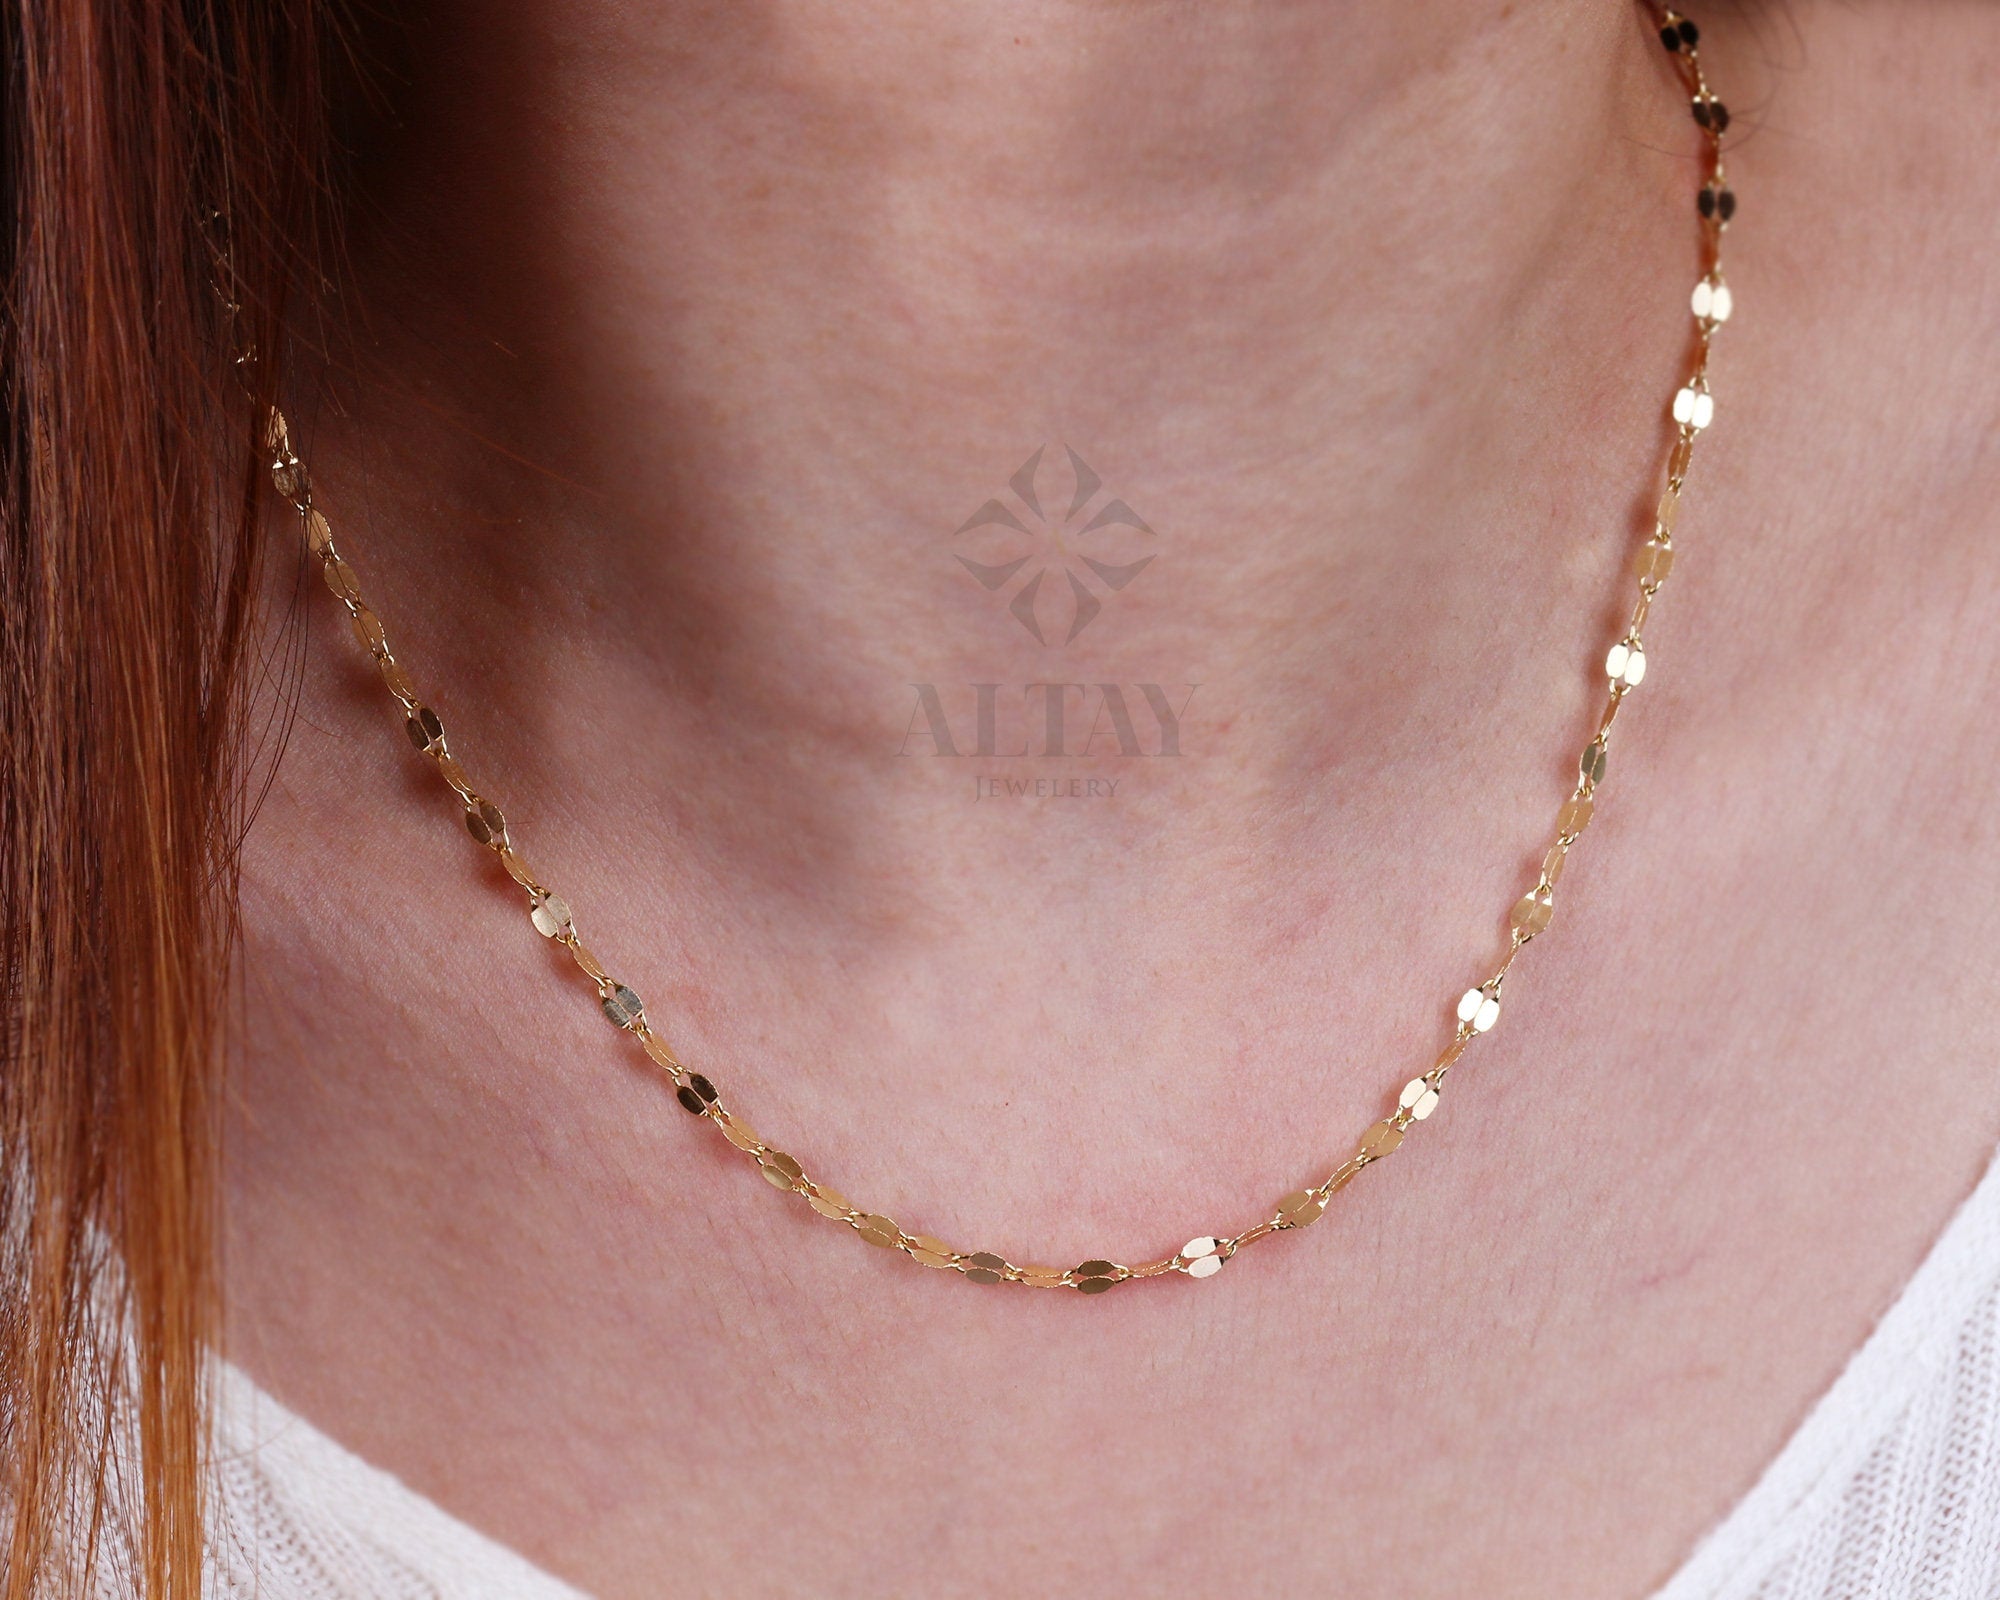 14K Solid Gold Sequin Necklace, Dainty Chain Choker, Dainty Lace Thin Gold Charm, Delicate Sequin Necklace, Gift For Her